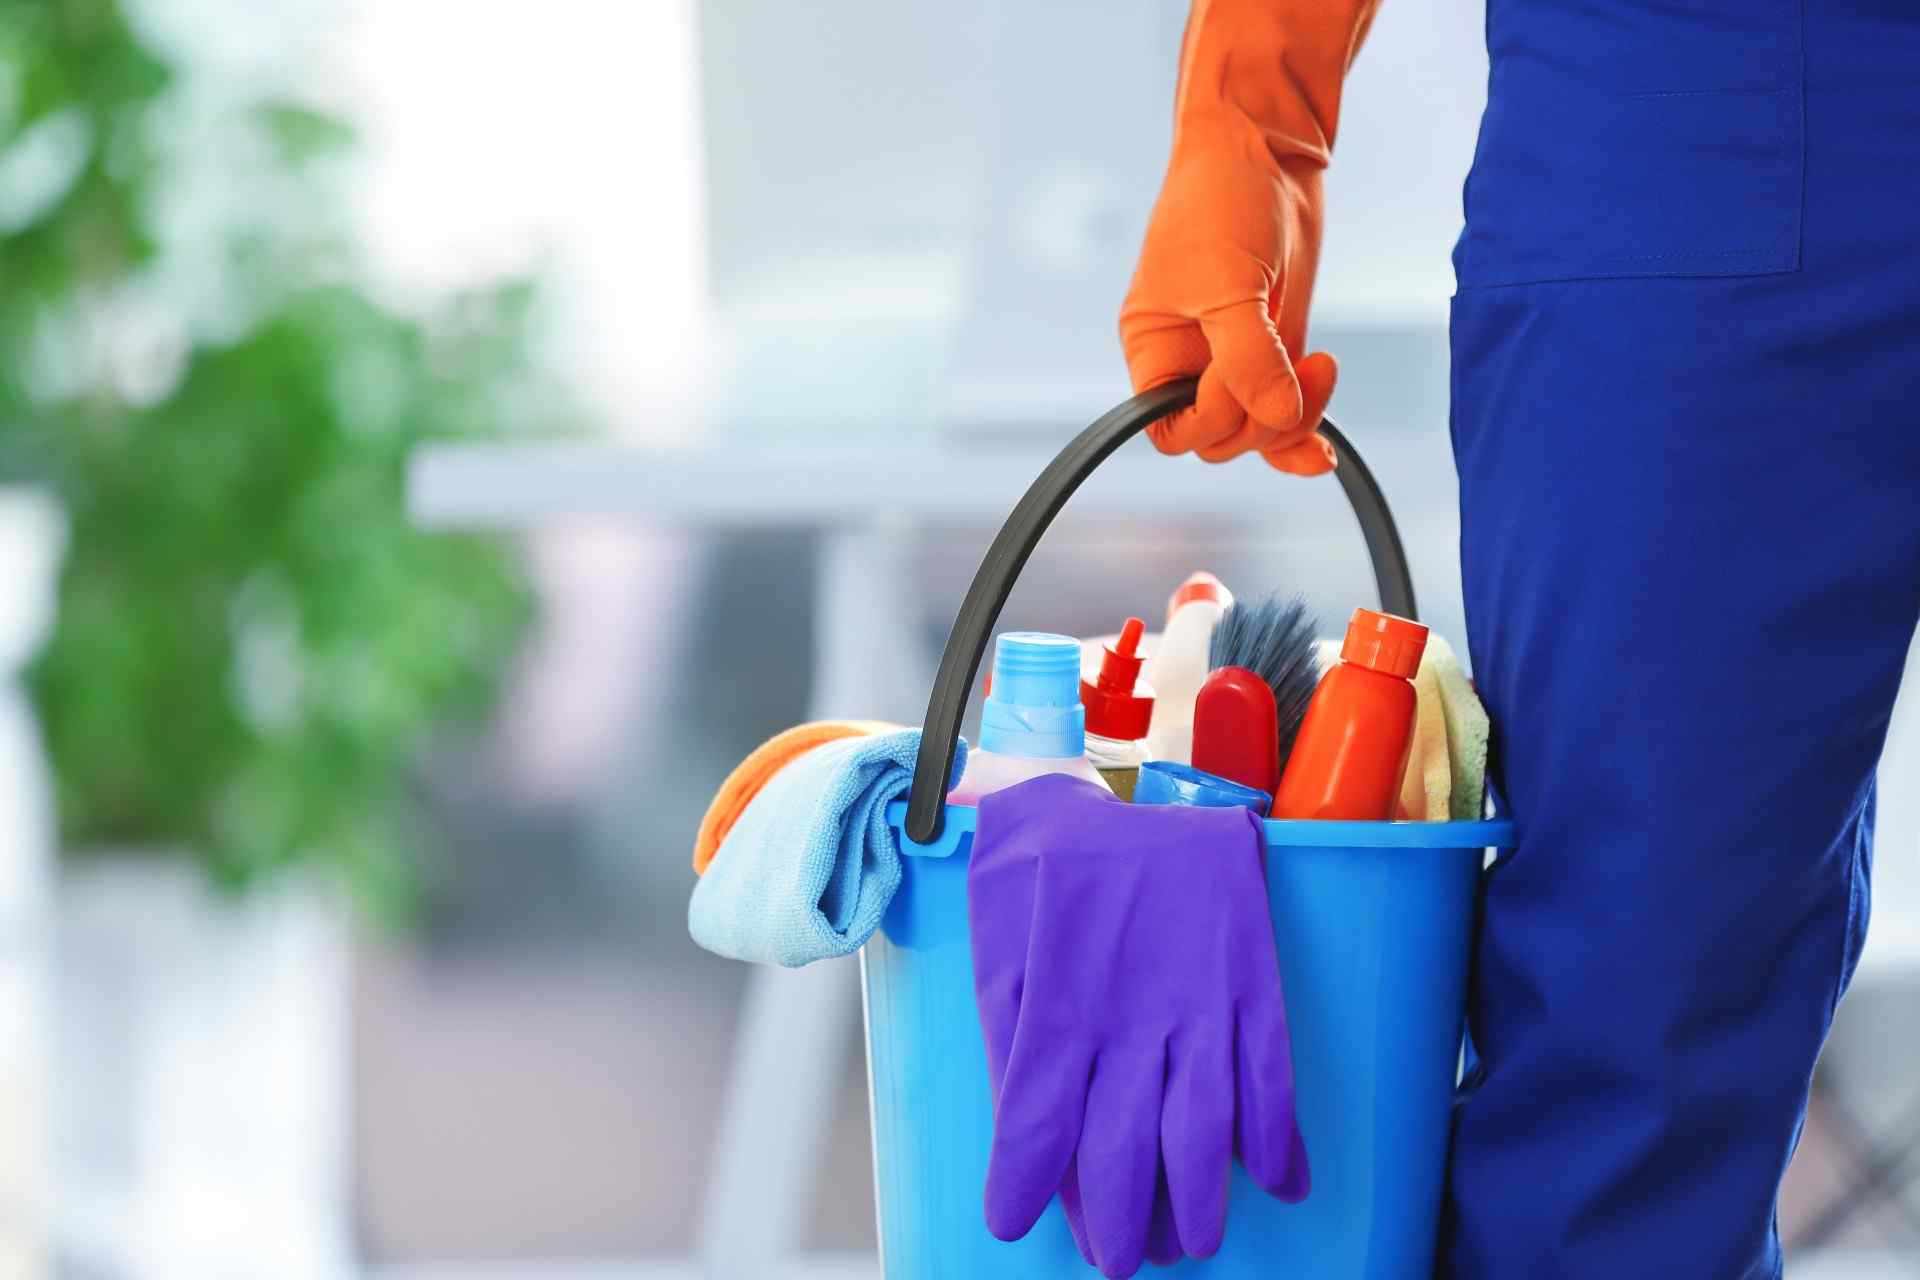 Best Cleaning Company